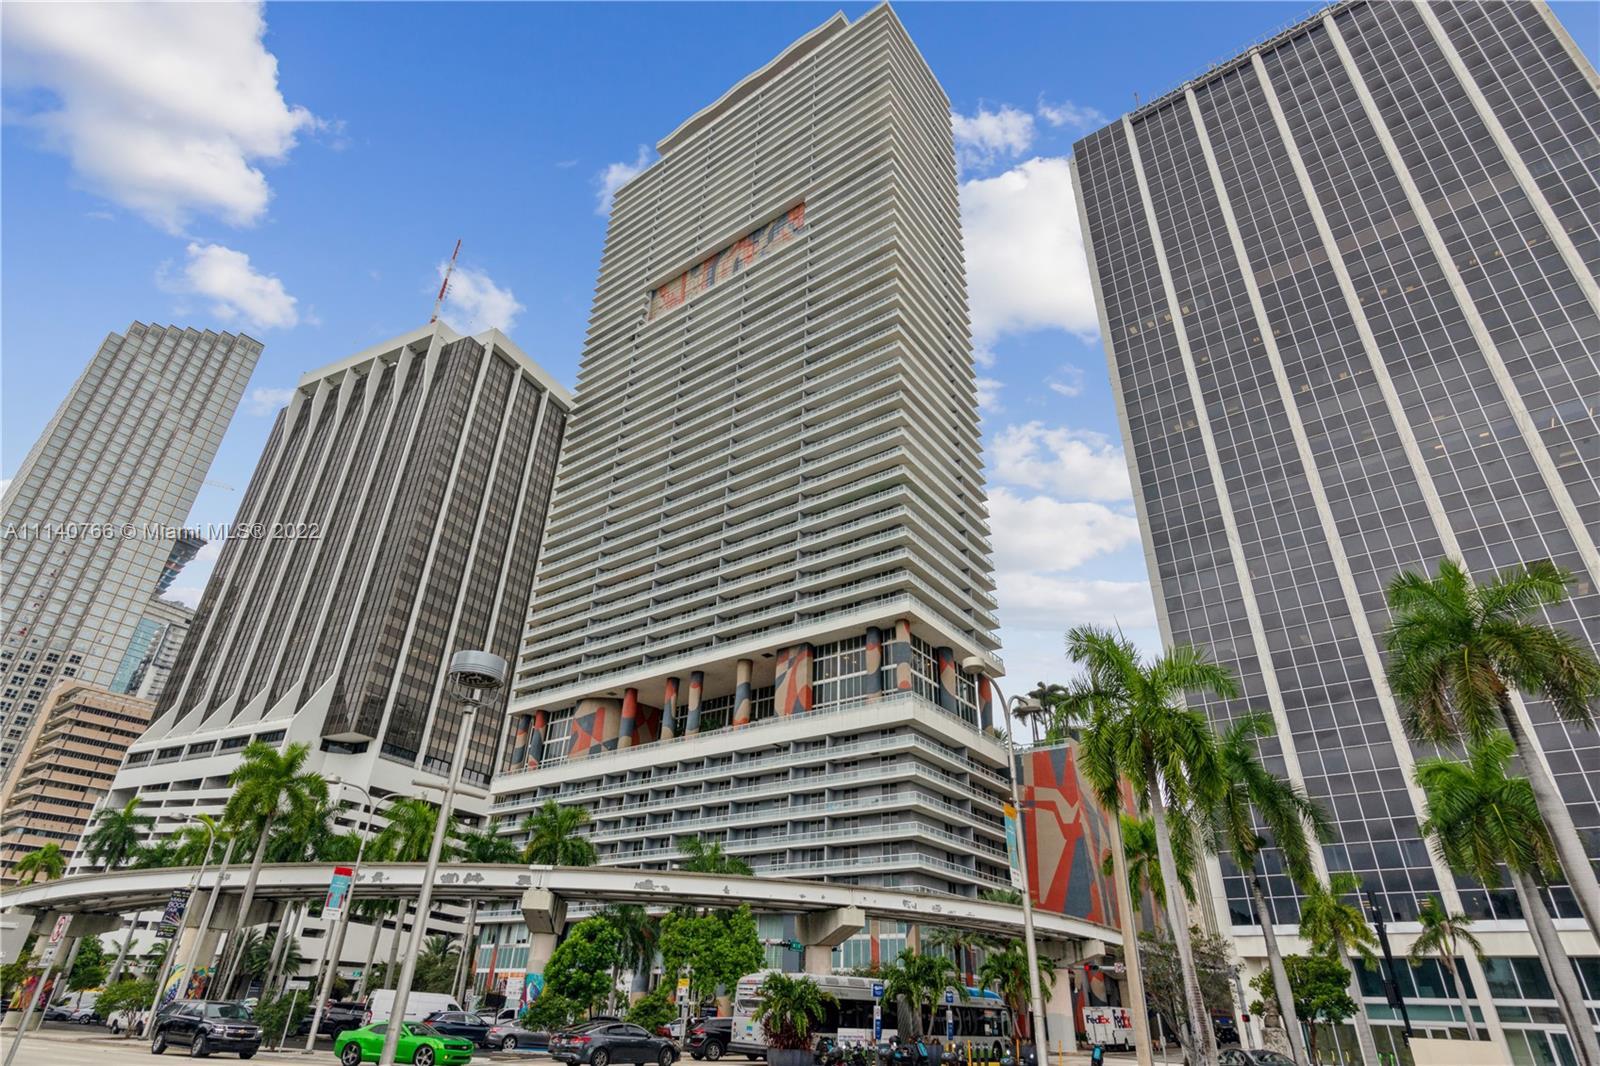 Come see 50 Biscayne Blvd in Downtown Miami! Enjoy views of the port of Miami and the Biscayne Bay. 